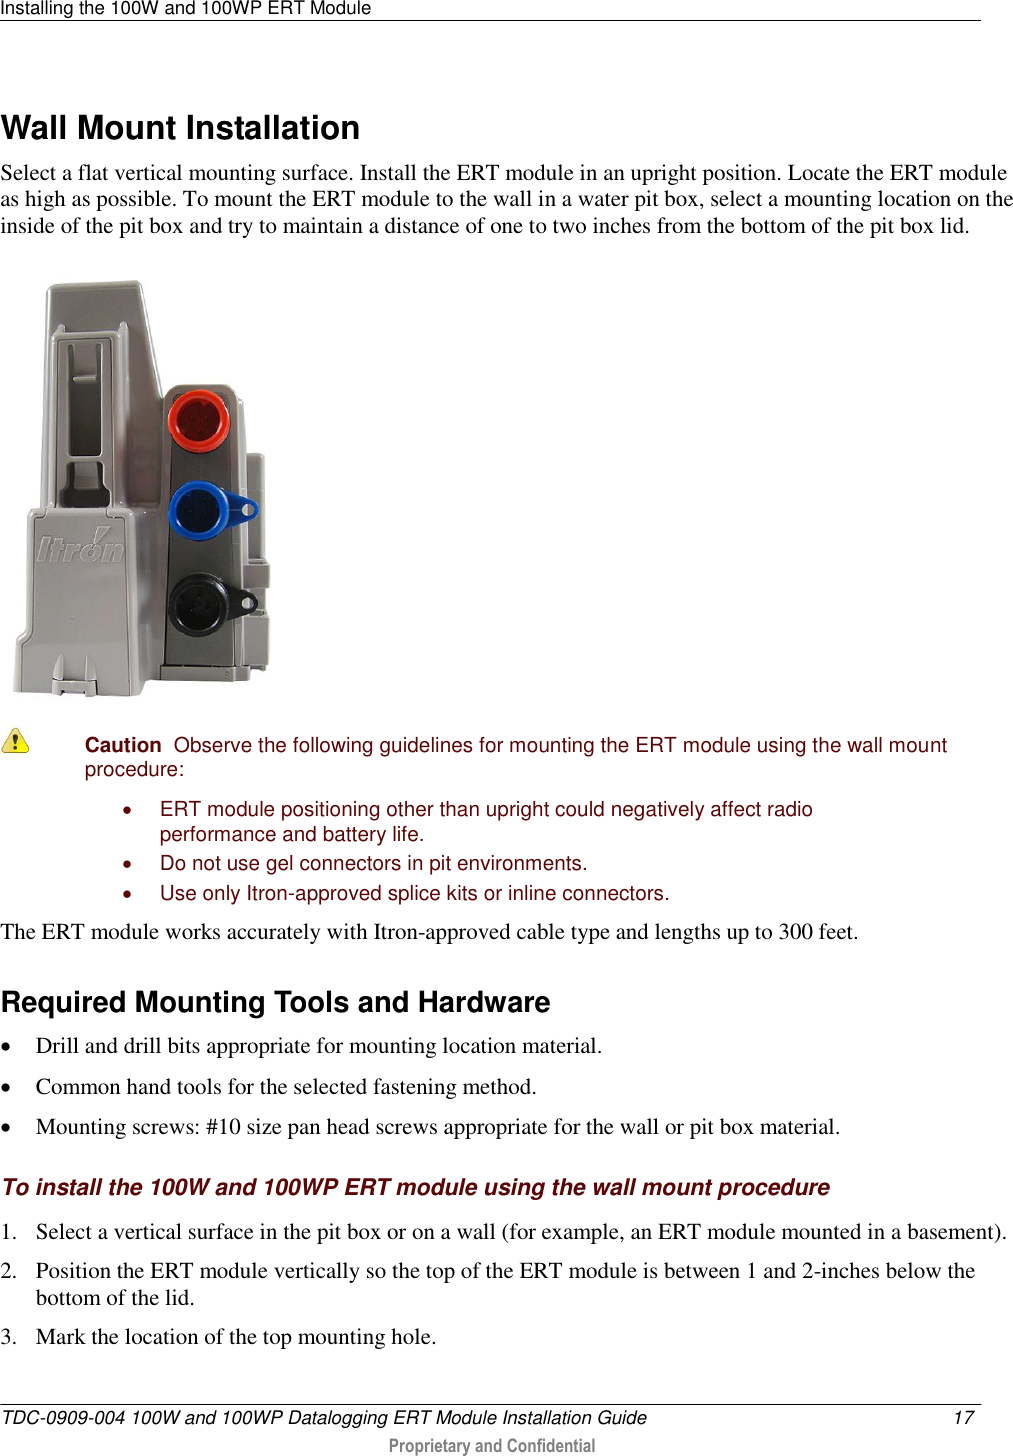 Installing the 100W and 100WP ERT Module   TDC-0909-004 100W and 100WP Datalogging ERT Module Installation Guide  17   Proprietary and Confidential     Wall Mount Installation Select a flat vertical mounting surface. Install the ERT module in an upright position. Locate the ERT module as high as possible. To mount the ERT module to the wall in a water pit box, select a mounting location on the inside of the pit box and try to maintain a distance of one to two inches from the bottom of the pit box lid.    Caution  Observe the following guidelines for mounting the ERT module using the wall mount procedure:   ERT module positioning other than upright could negatively affect radio performance and battery life.   Do not use gel connectors in pit environments.   Use only Itron-approved splice kits or inline connectors.  The ERT module works accurately with Itron-approved cable type and lengths up to 300 feet.  Required Mounting Tools and Hardware  Drill and drill bits appropriate for mounting location material.  Common hand tools for the selected fastening method.  Mounting screws: #10 size pan head screws appropriate for the wall or pit box material.  To install the 100W and 100WP ERT module using the wall mount procedure 1. Select a vertical surface in the pit box or on a wall (for example, an ERT module mounted in a basement). 2. Position the ERT module vertically so the top of the ERT module is between 1 and 2-inches below the bottom of the lid. 3. Mark the location of the top mounting hole. 